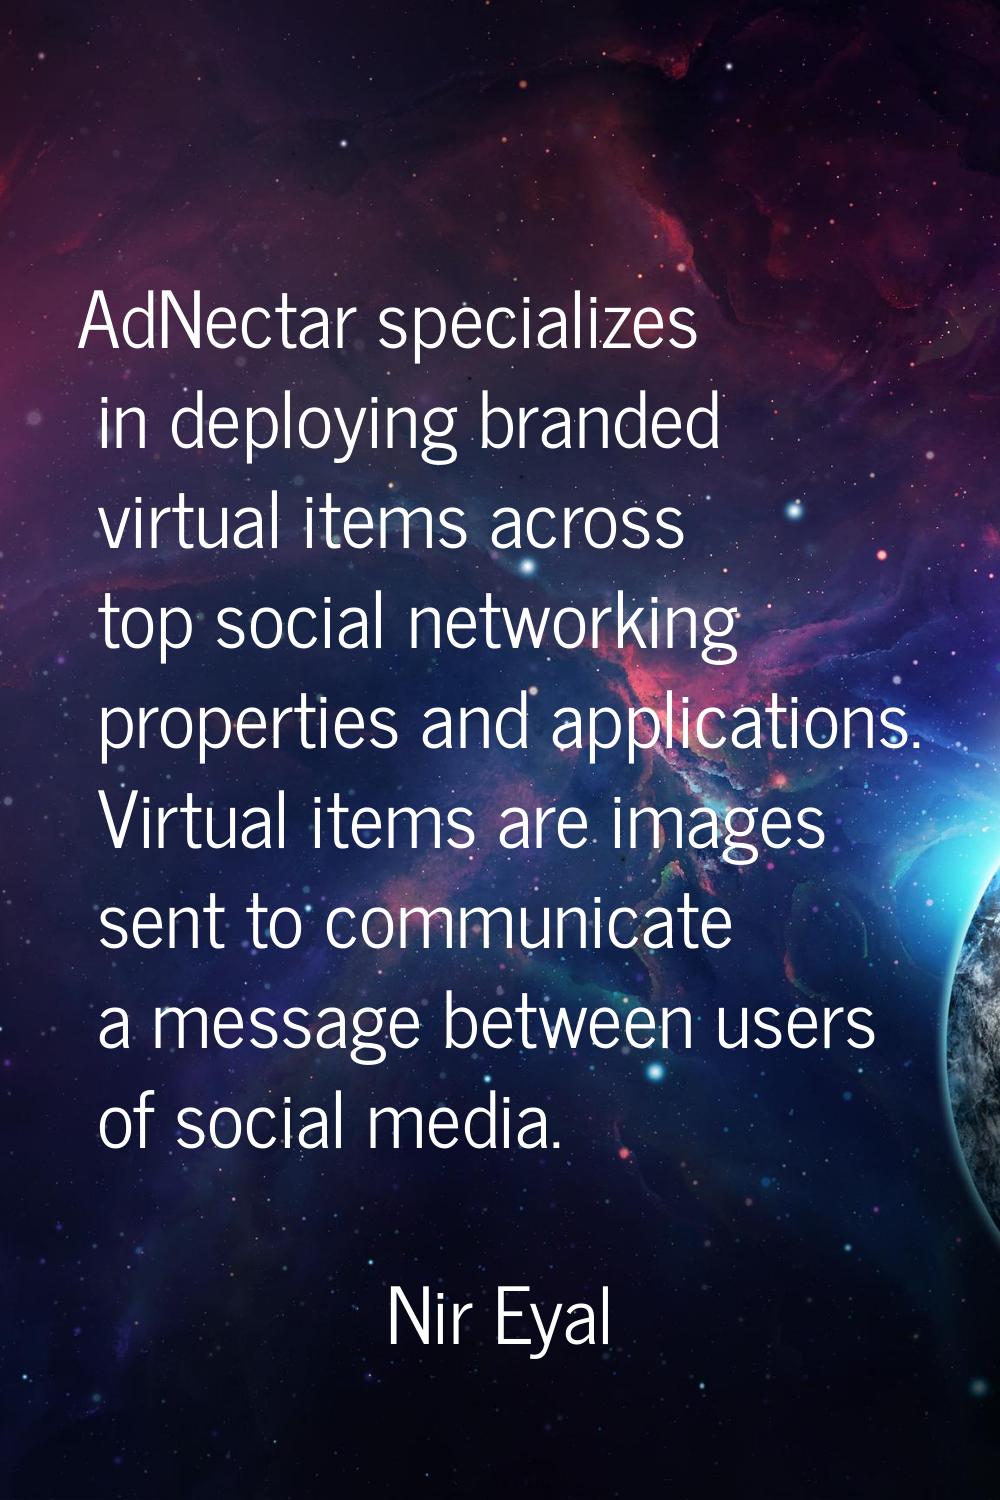 AdNectar specializes in deploying branded virtual items across top social networking properties and